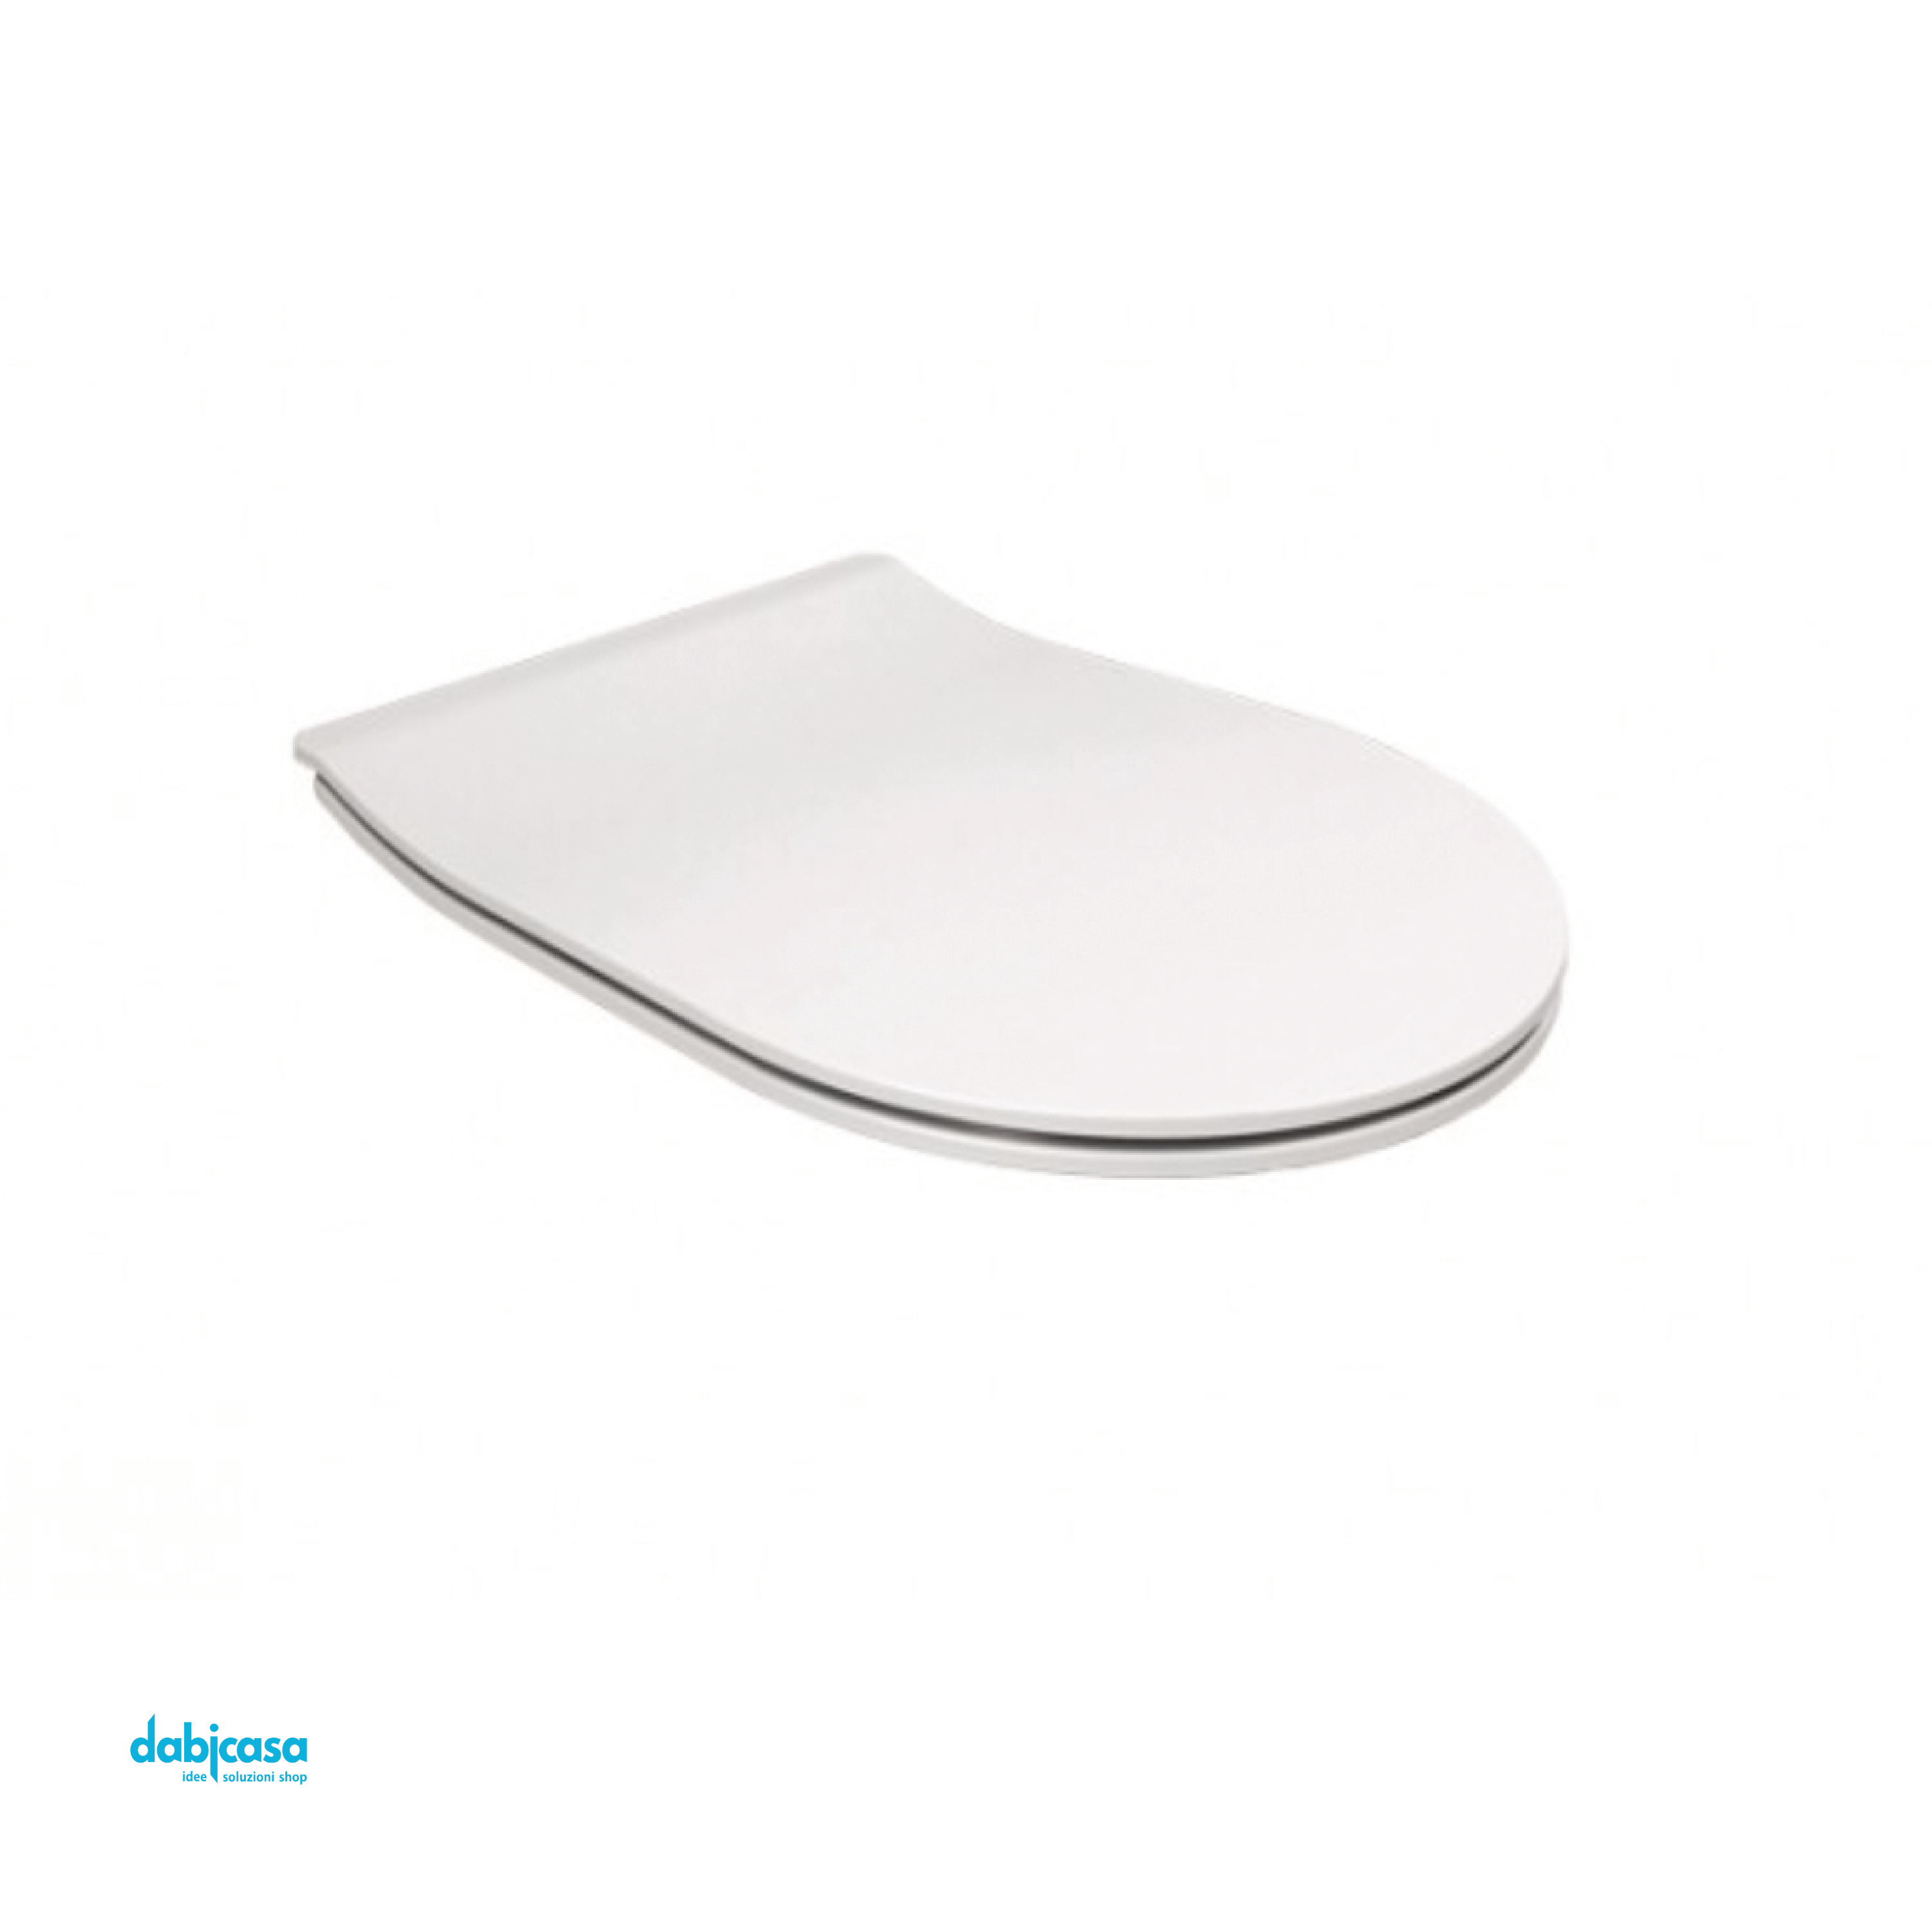 Althea "Cover XL" Copriwater Bianco Lucido